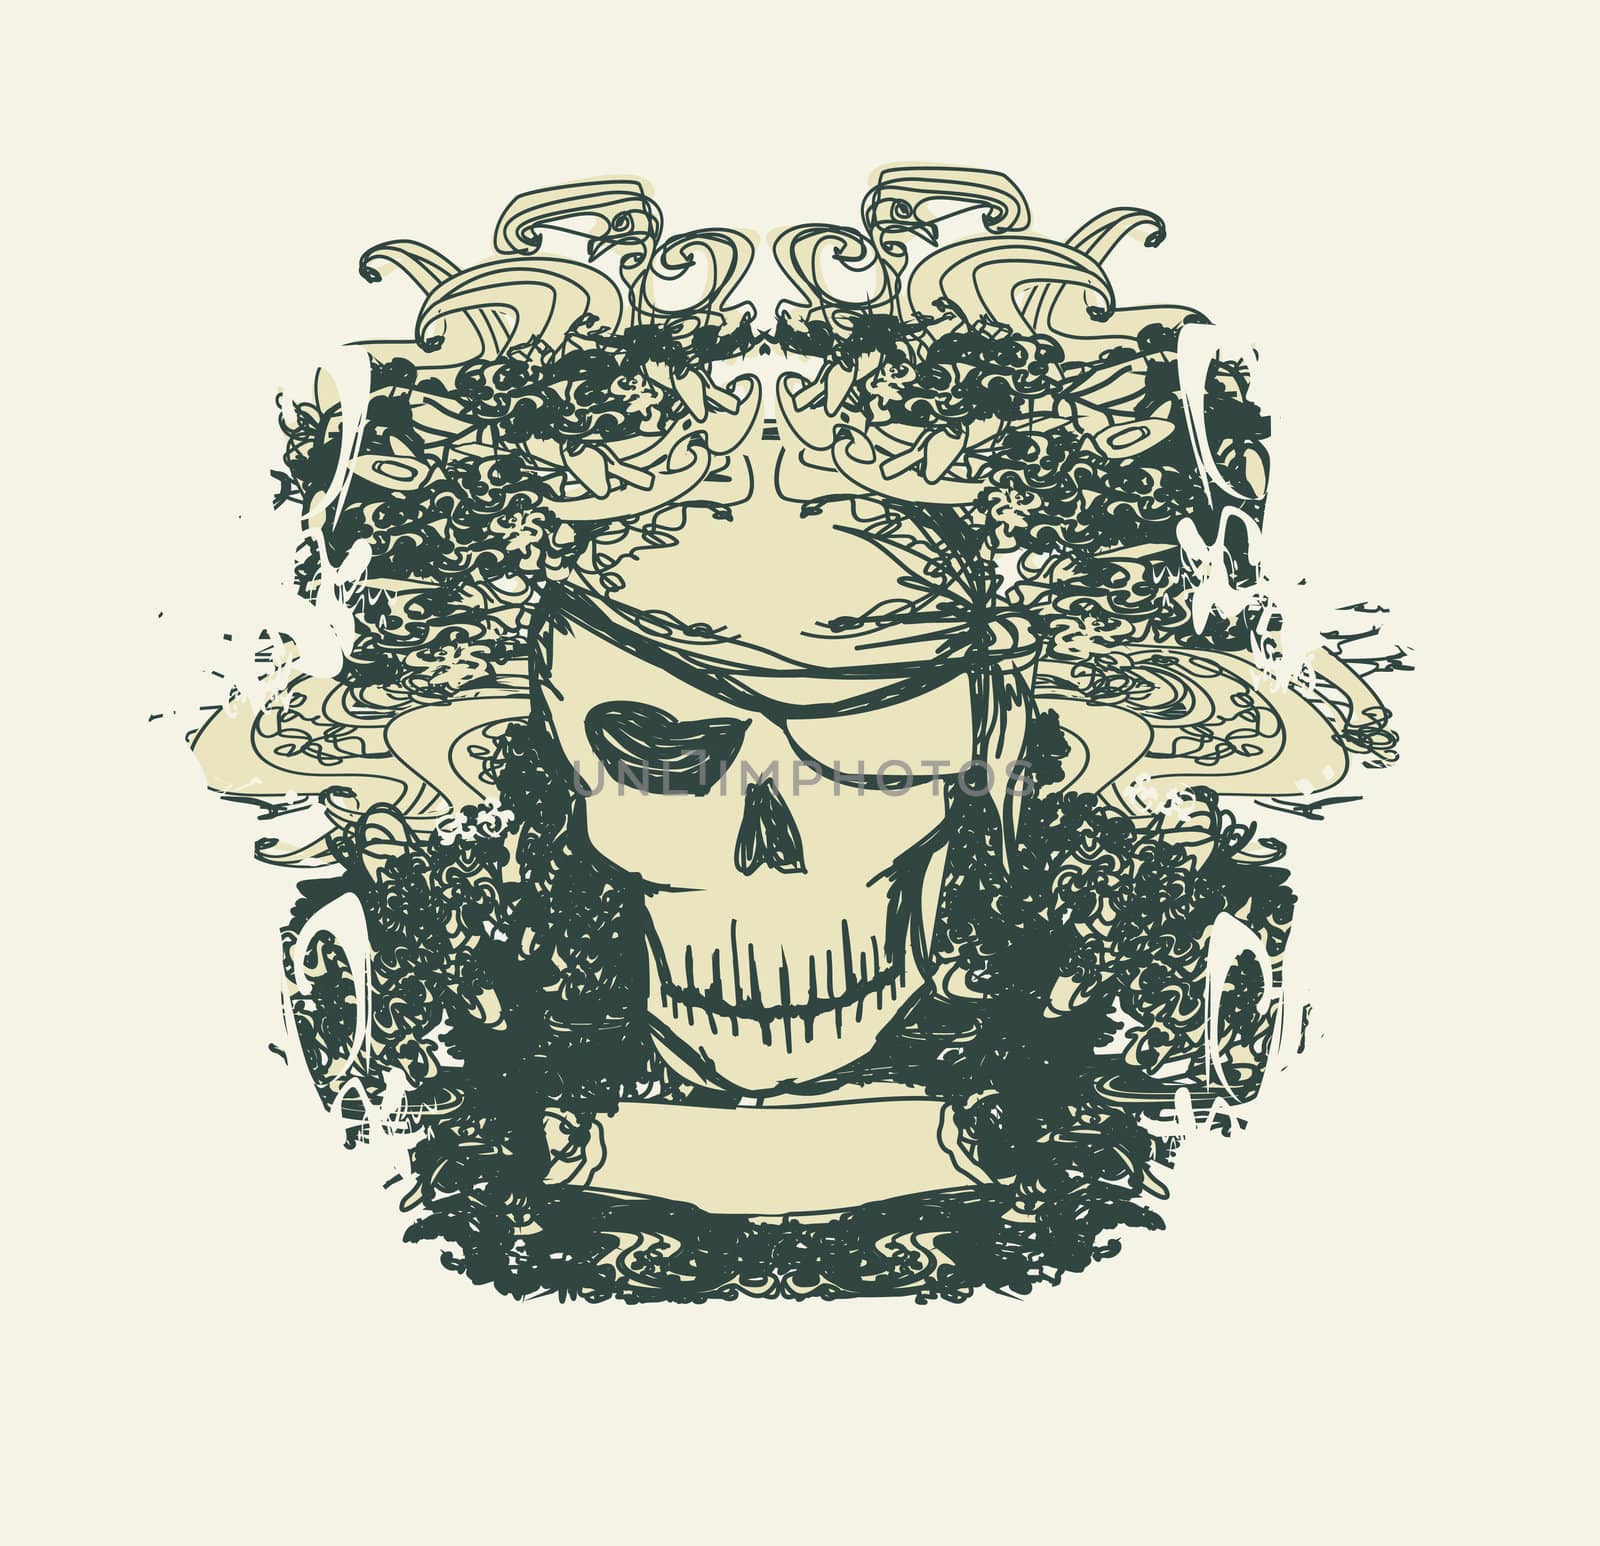 Skull Pirate - retro card by JackyBrown